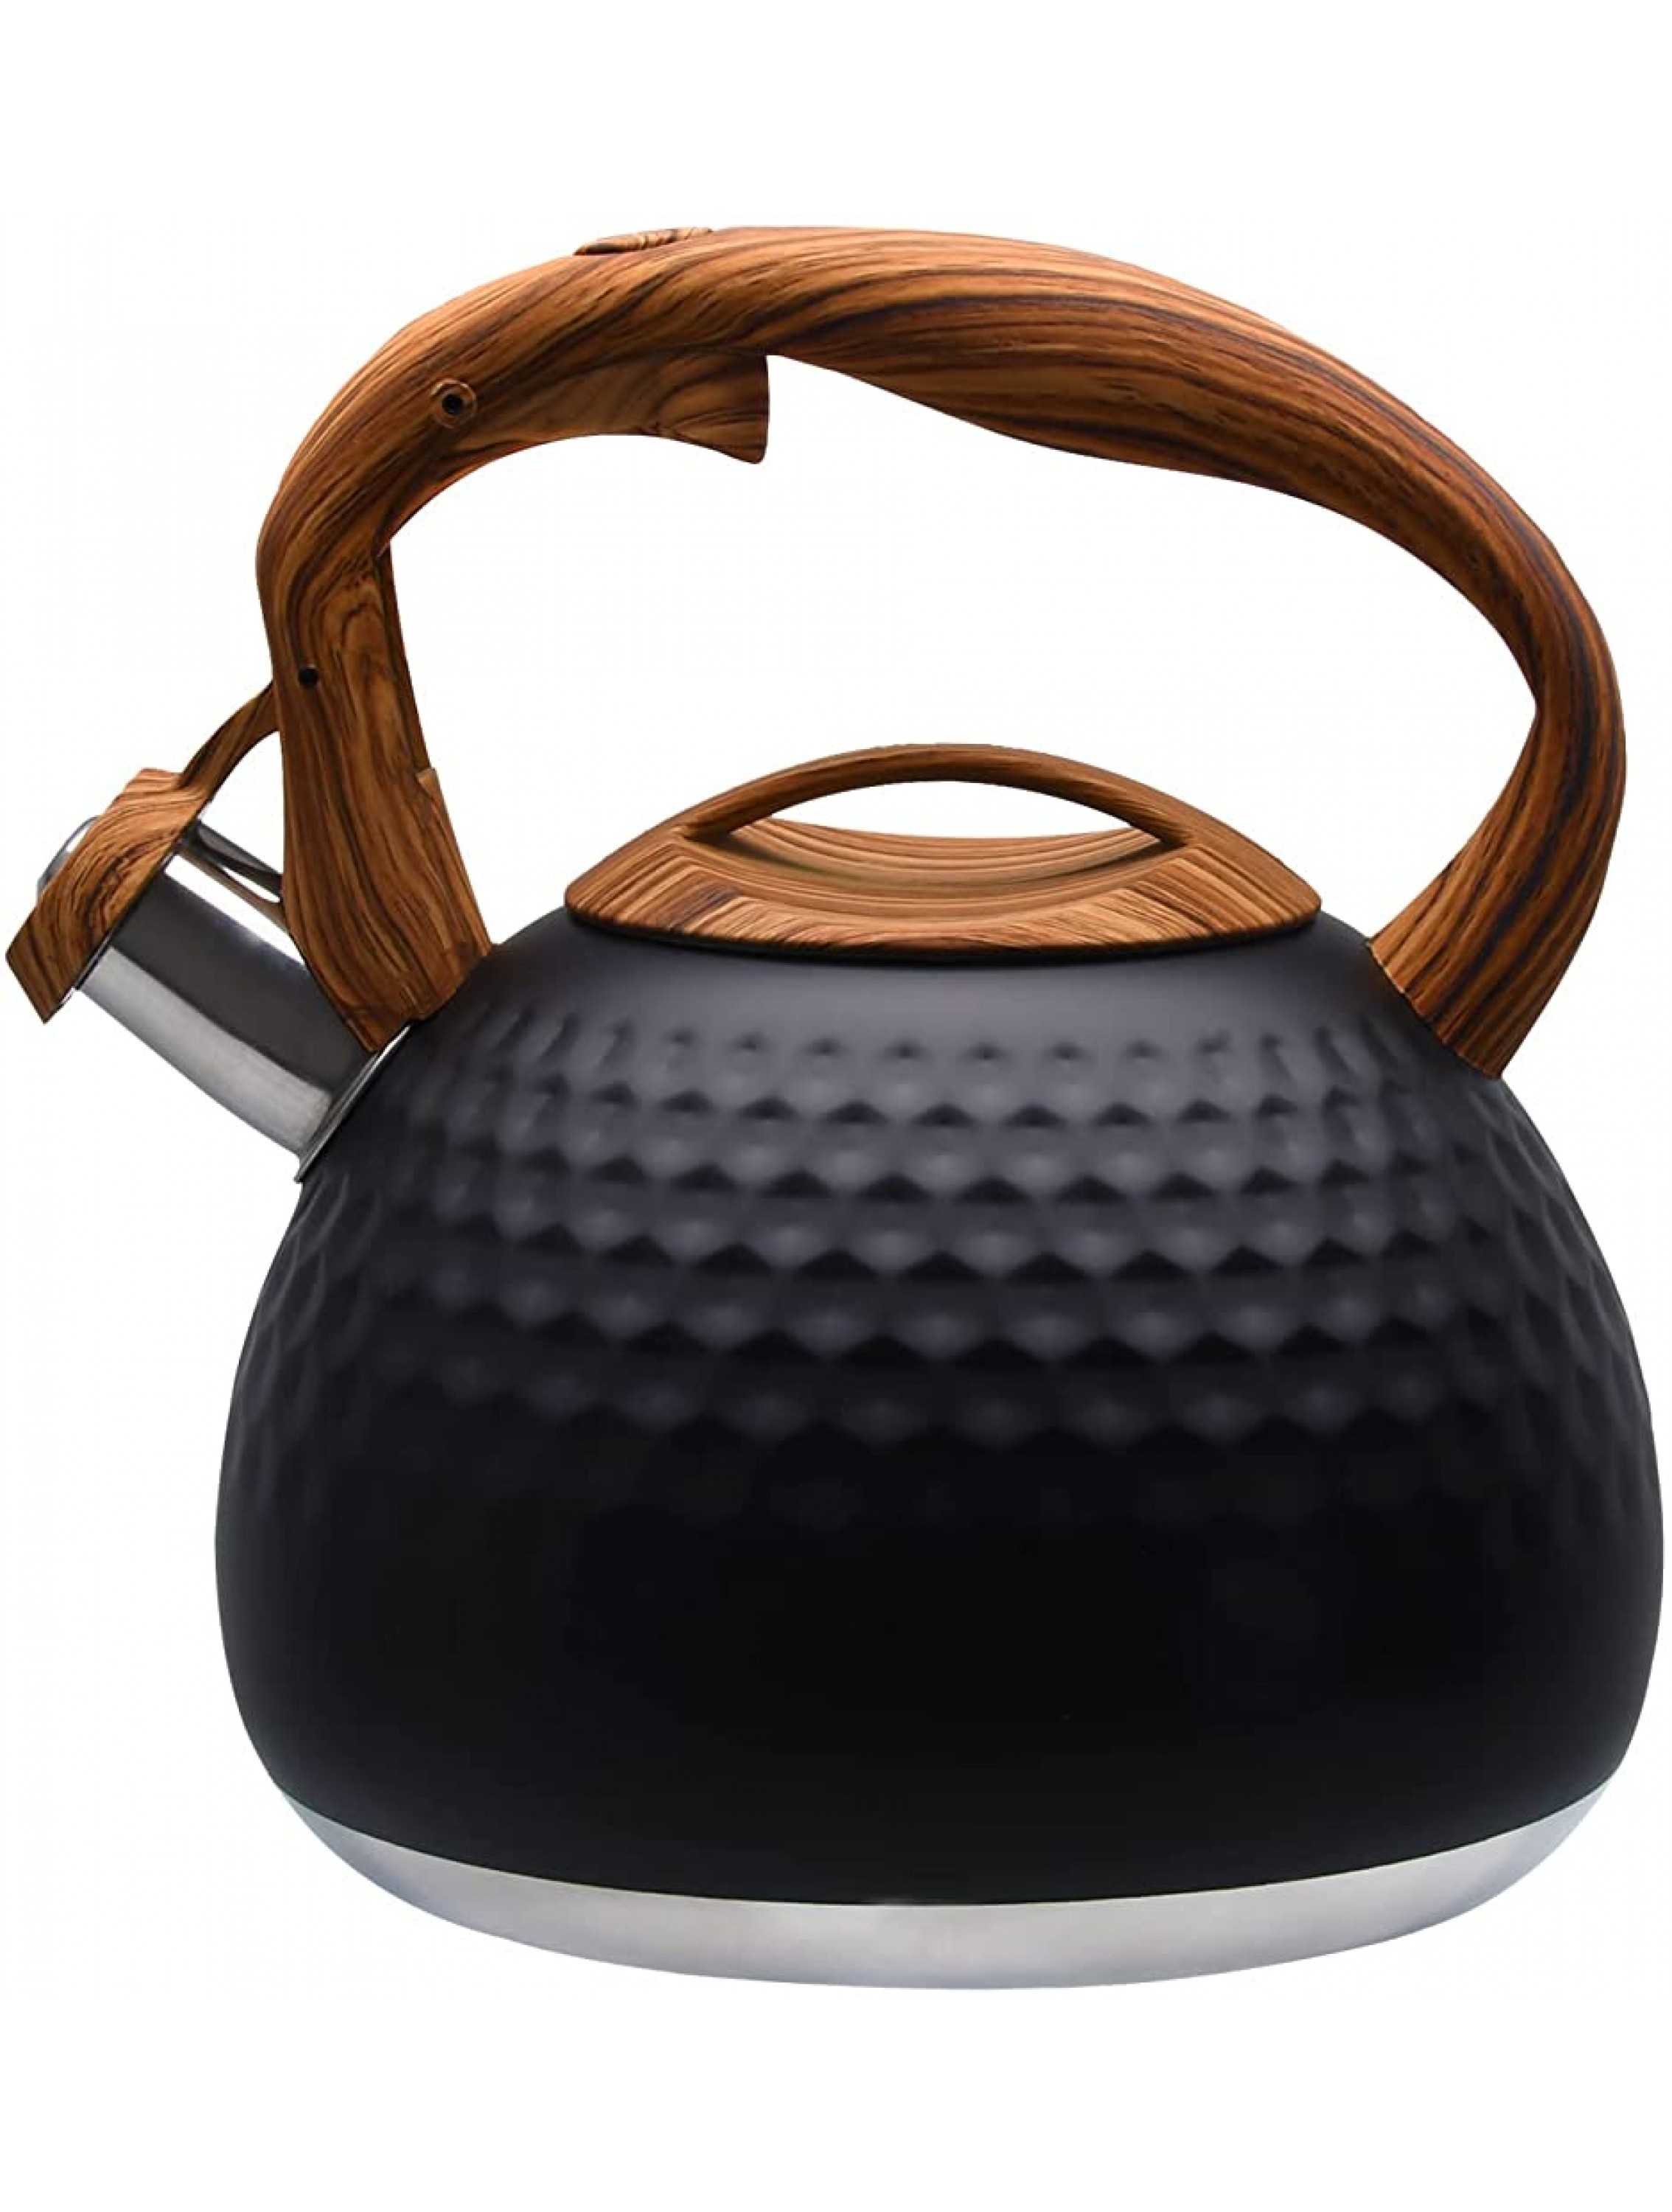 GGC Tea Kettle for Stove Top Loud Whistling Kettle for Boiling Water Coffee or Milk 2.7 Quart 3L Heavy Stainless Steel Black Kettle with Wood Pattern Handle Unique Button Control Kettle Outlet - B1O33KP1T